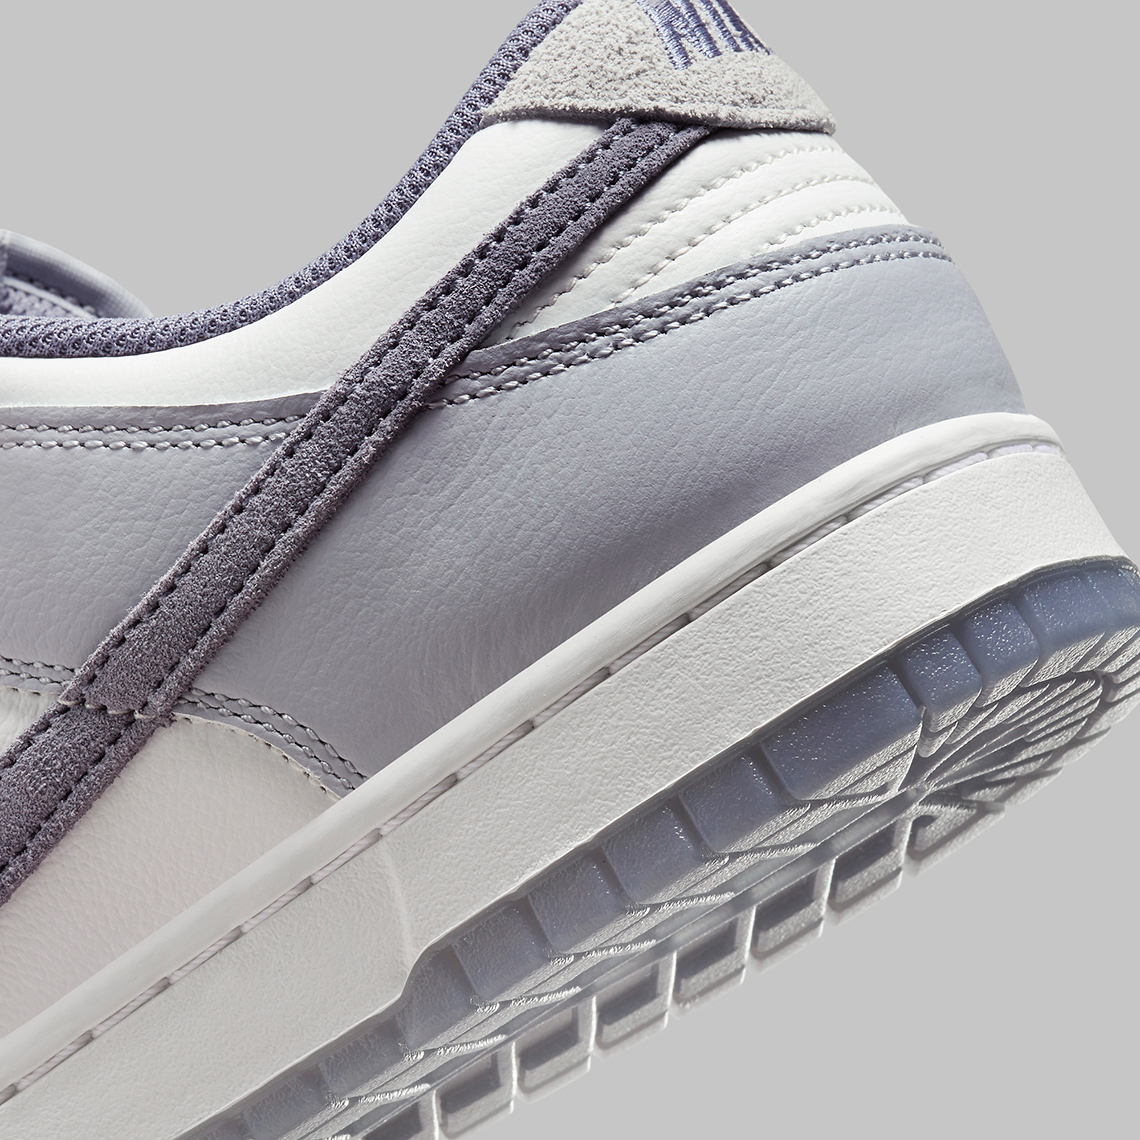 If You're A Fiend For The Color Grey, These Dunks Are For You ...